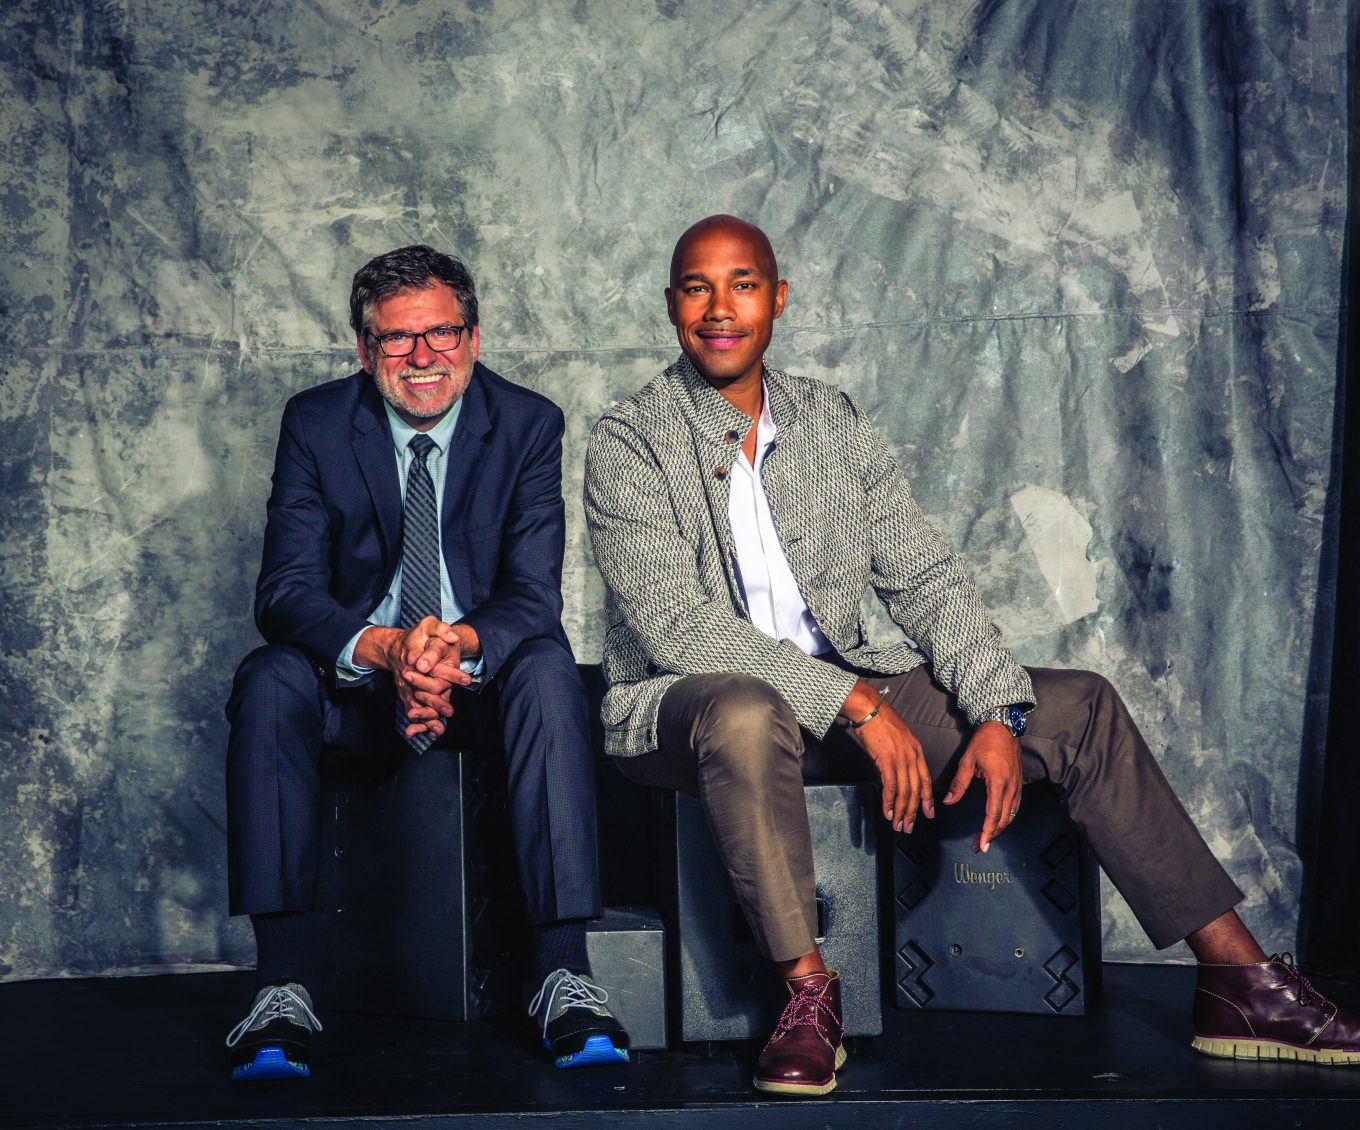 David Dower and David C. Howse sitting together in front of a gray backdrop